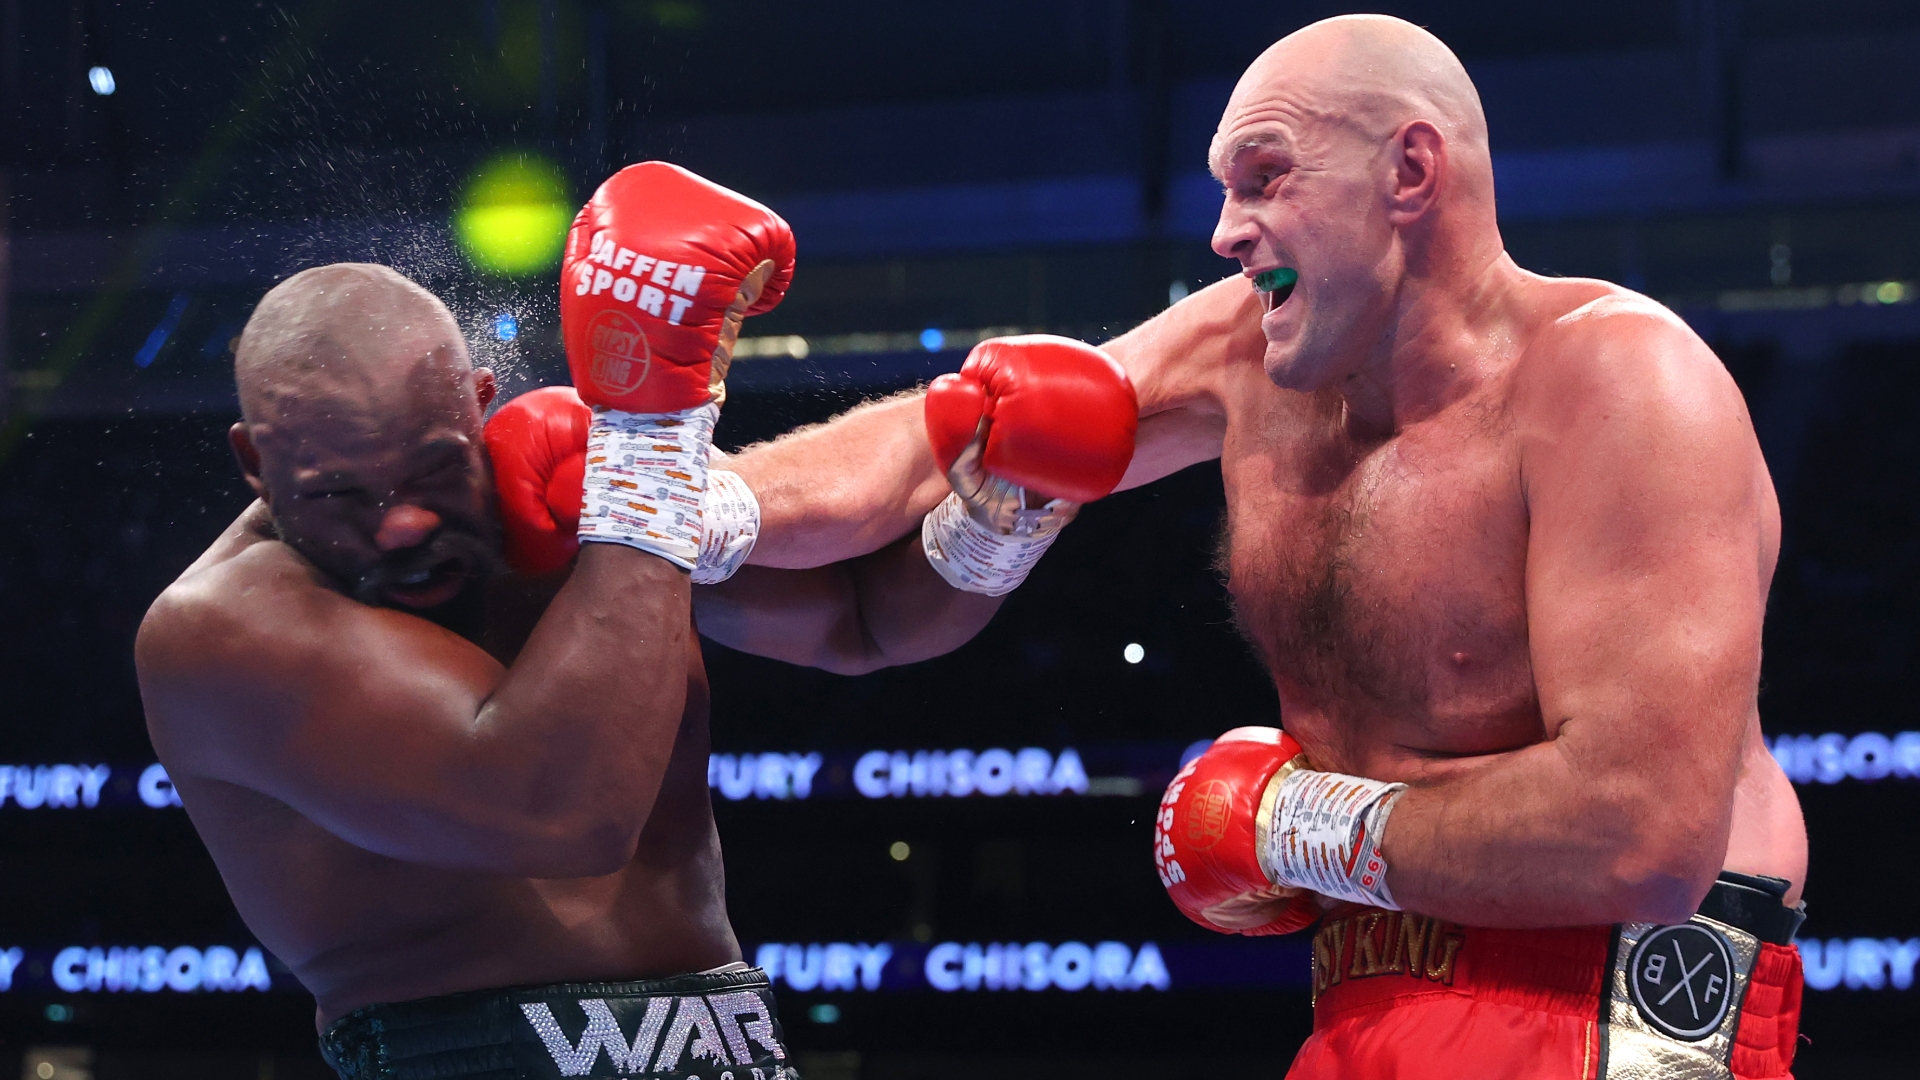 Tyson Fury defeats Derek Chisora by TKO to defend his titles - Stream the Video